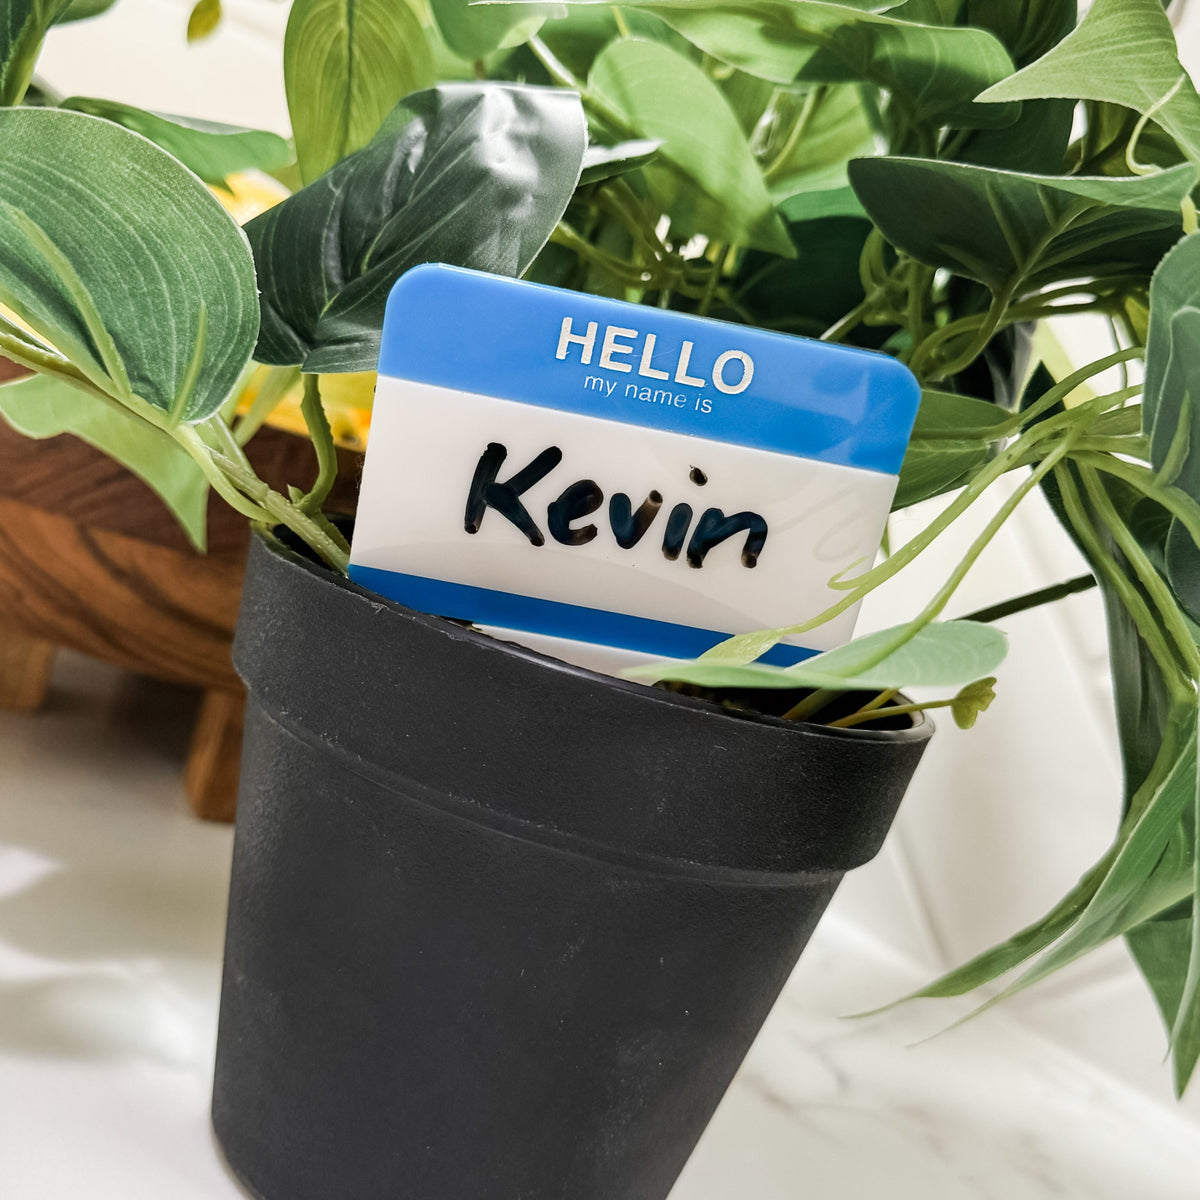 HELLO MY NAME IS... - Acrylic Plant Stake